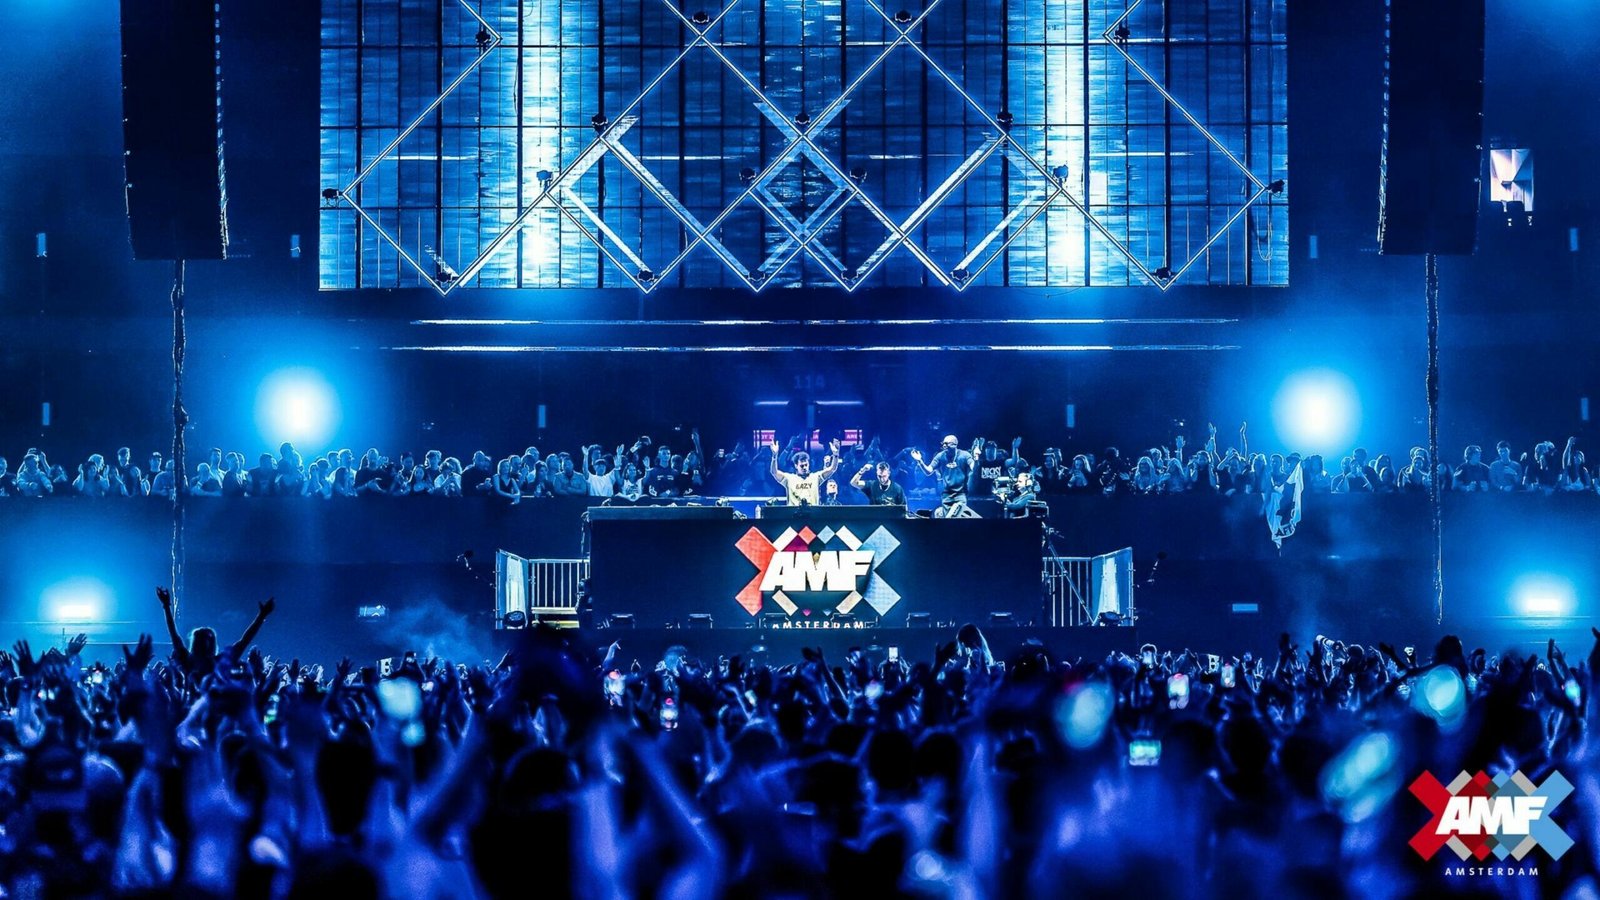 Amf's 10th anniversary sees performances from dance music's biggest stars in Amsterdam